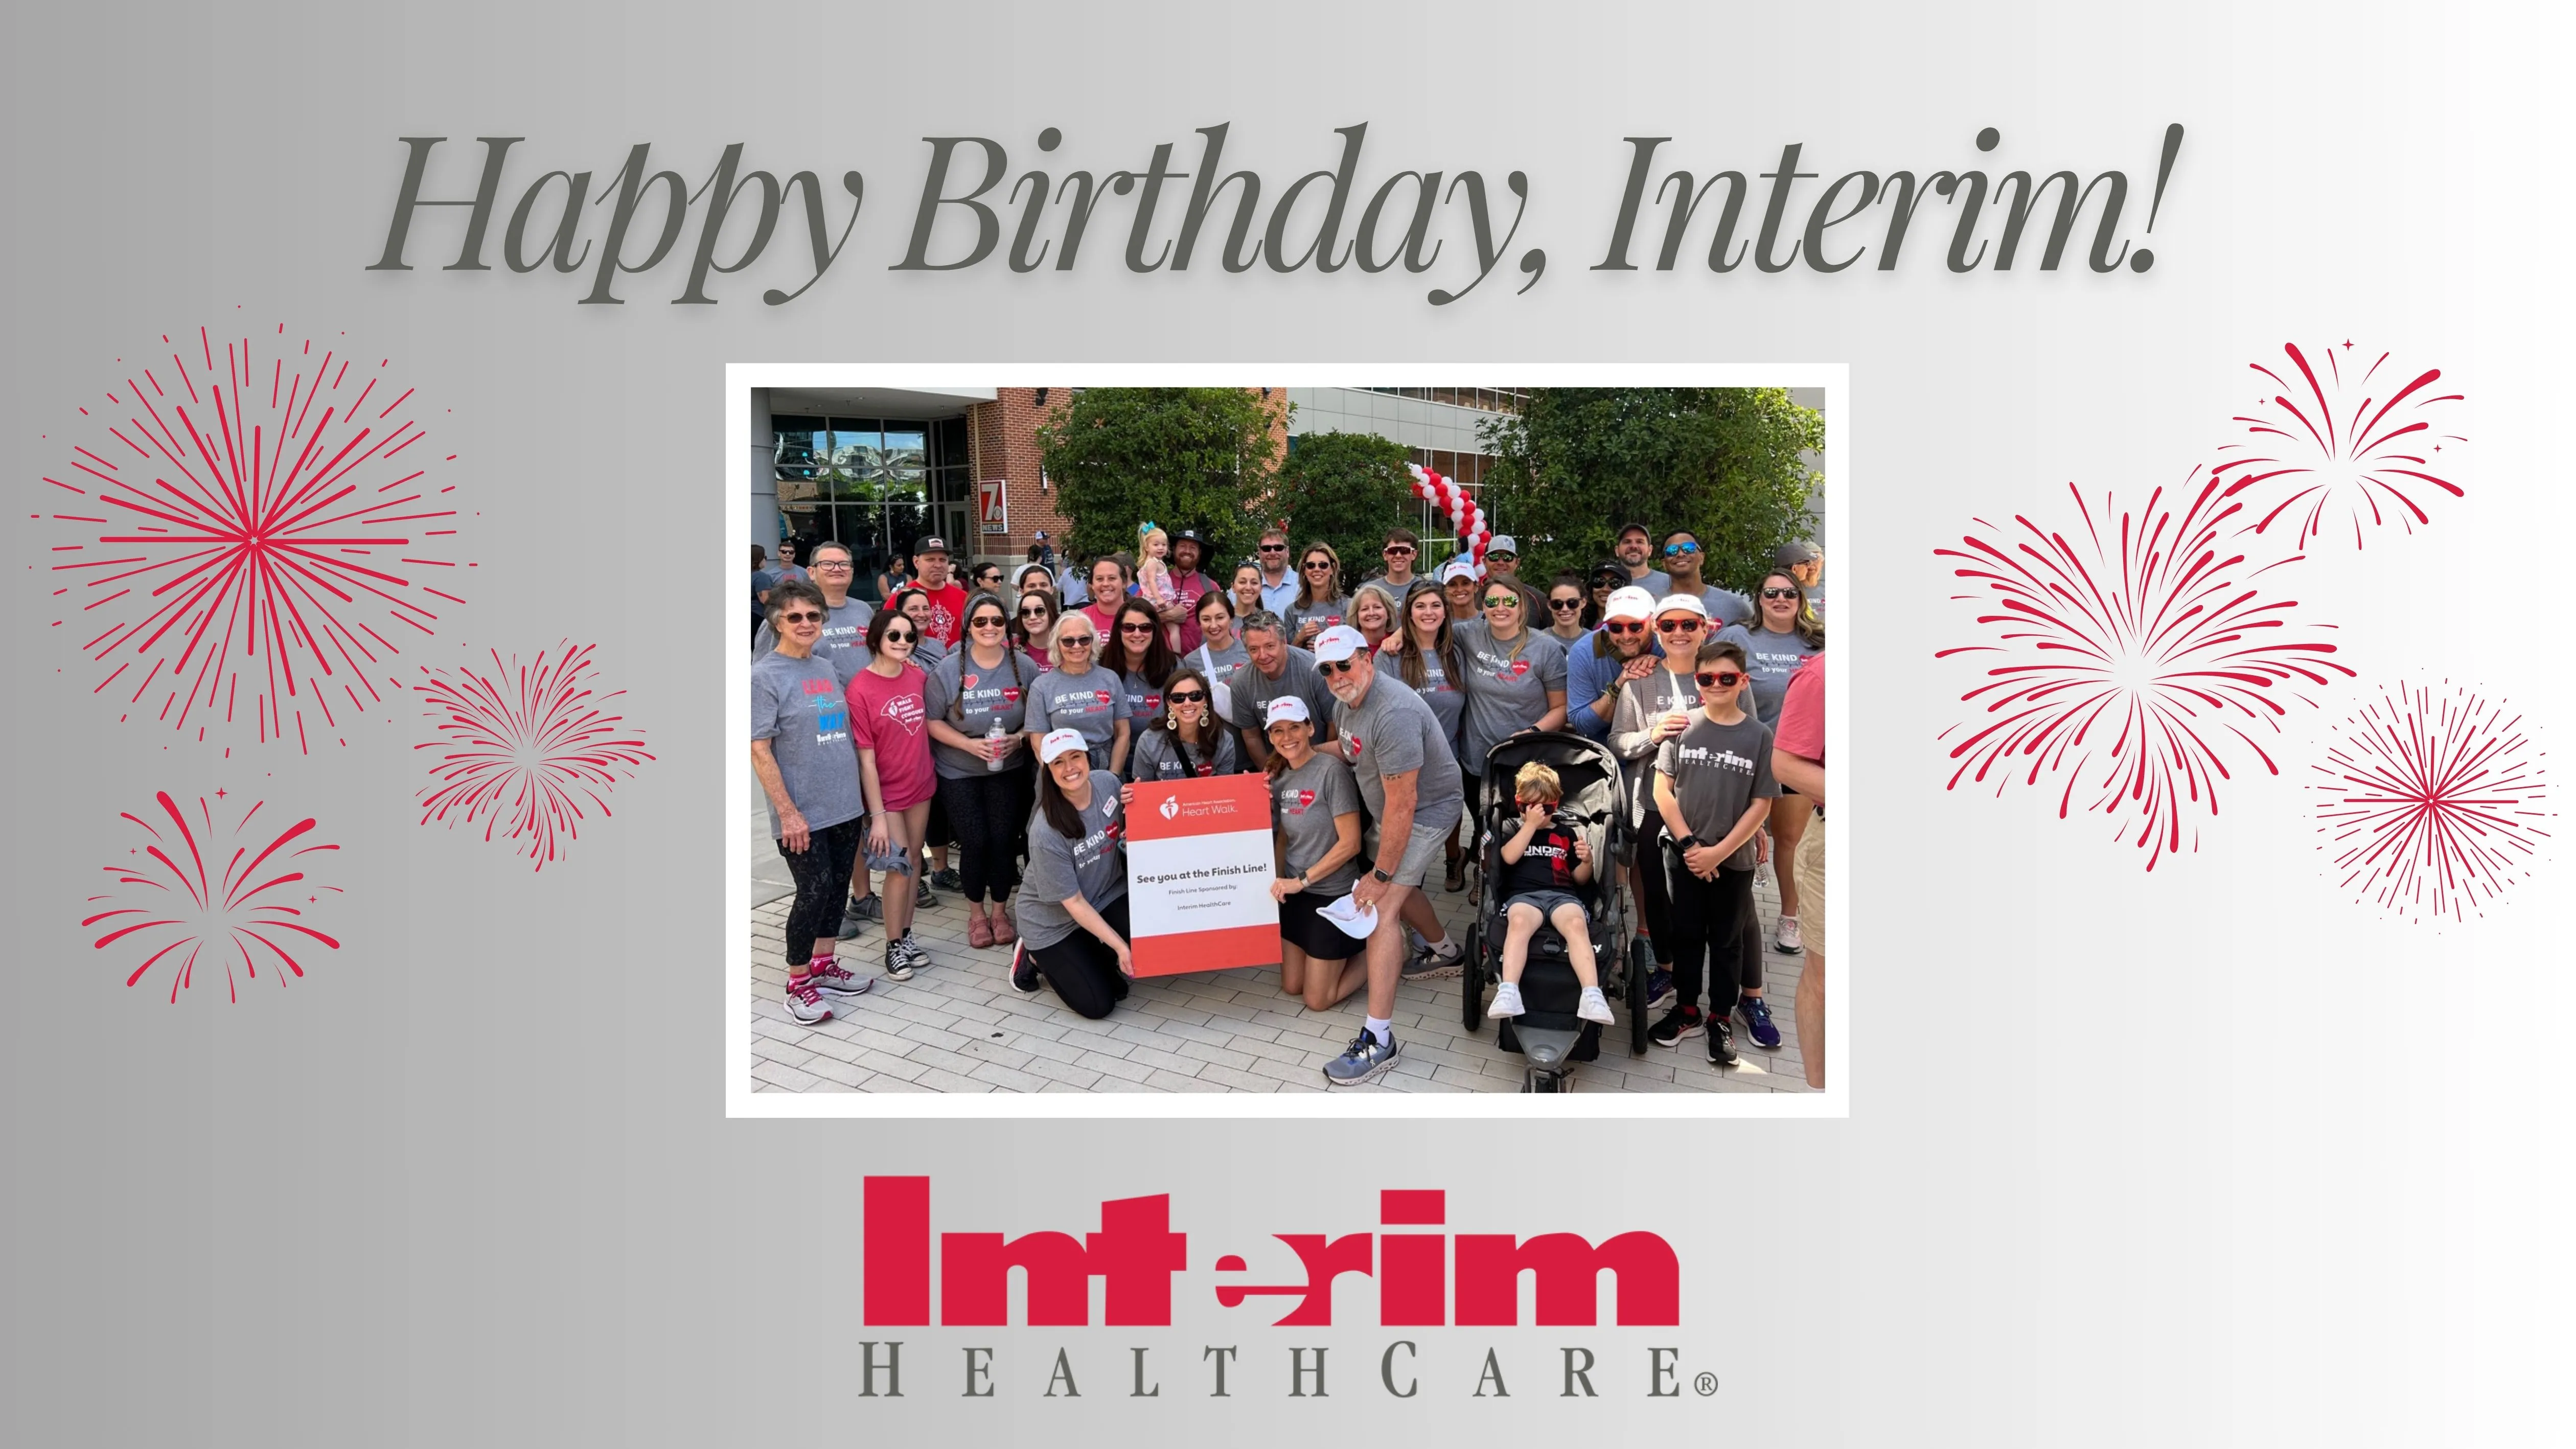 A group of Interim staff poses together on a graphic that says "Happy Birthday, Interim!"